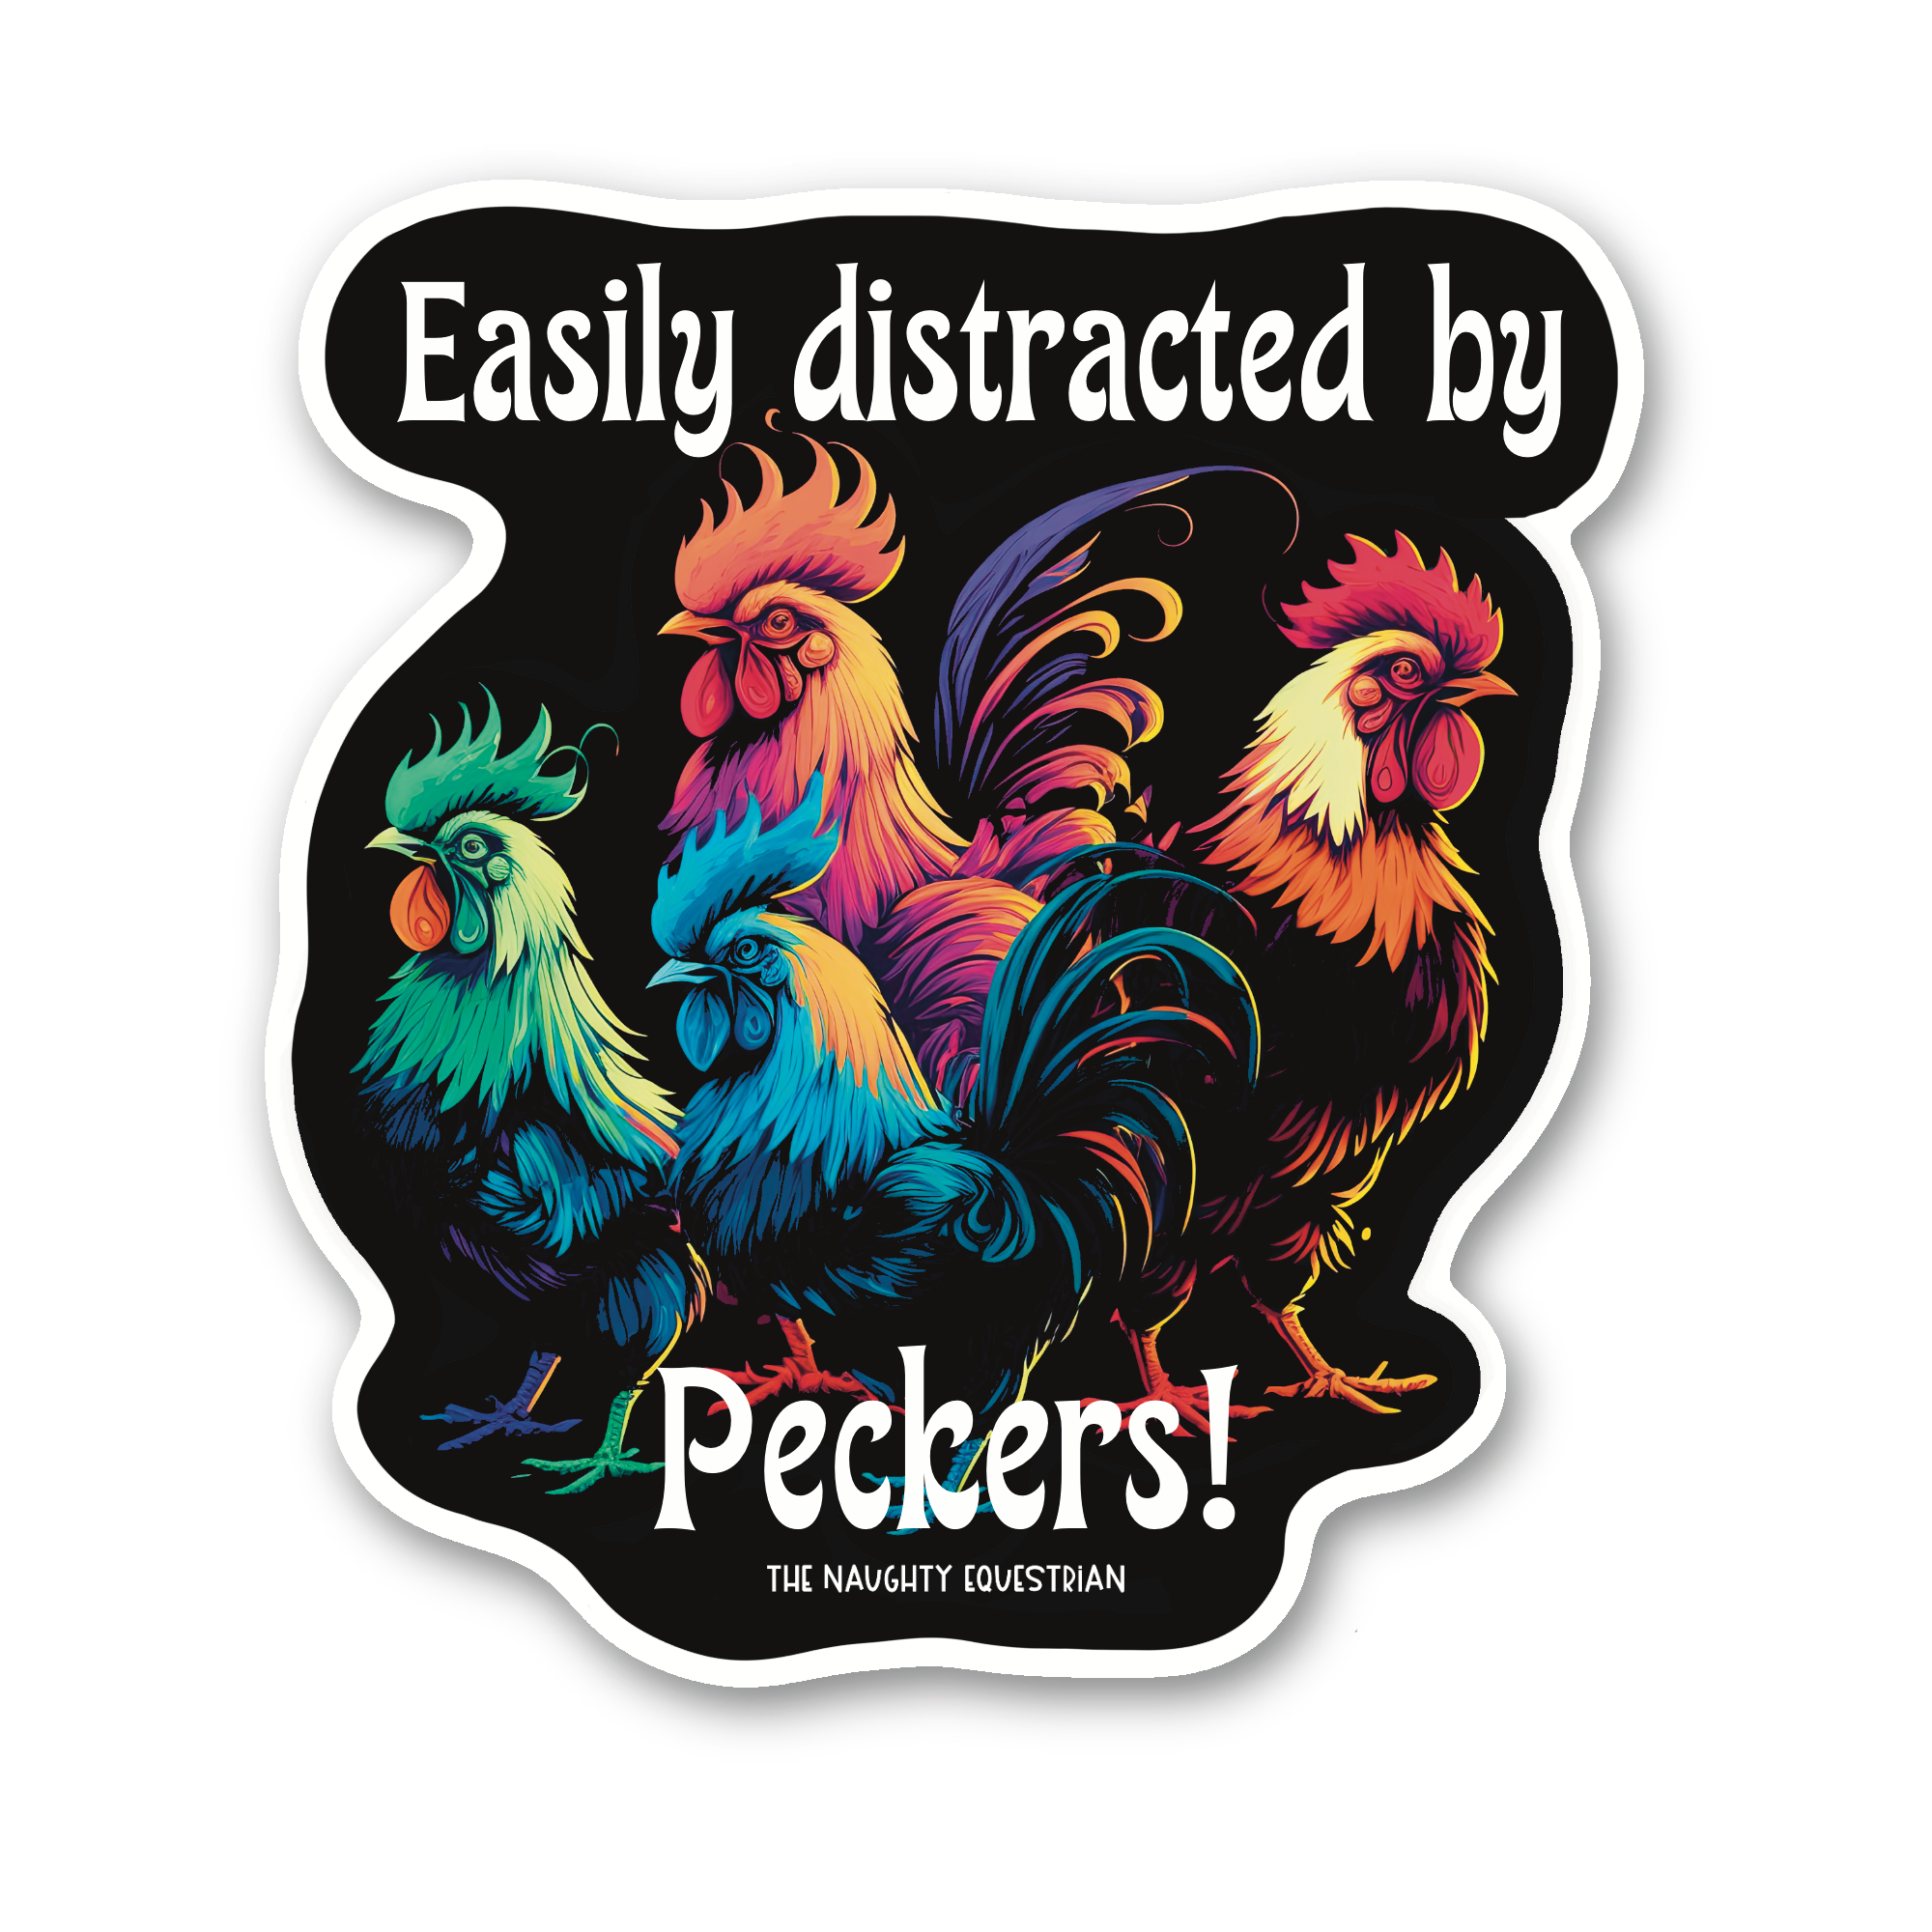 Easily Distracted by Peckers Sticker, Vinyl Car Decal